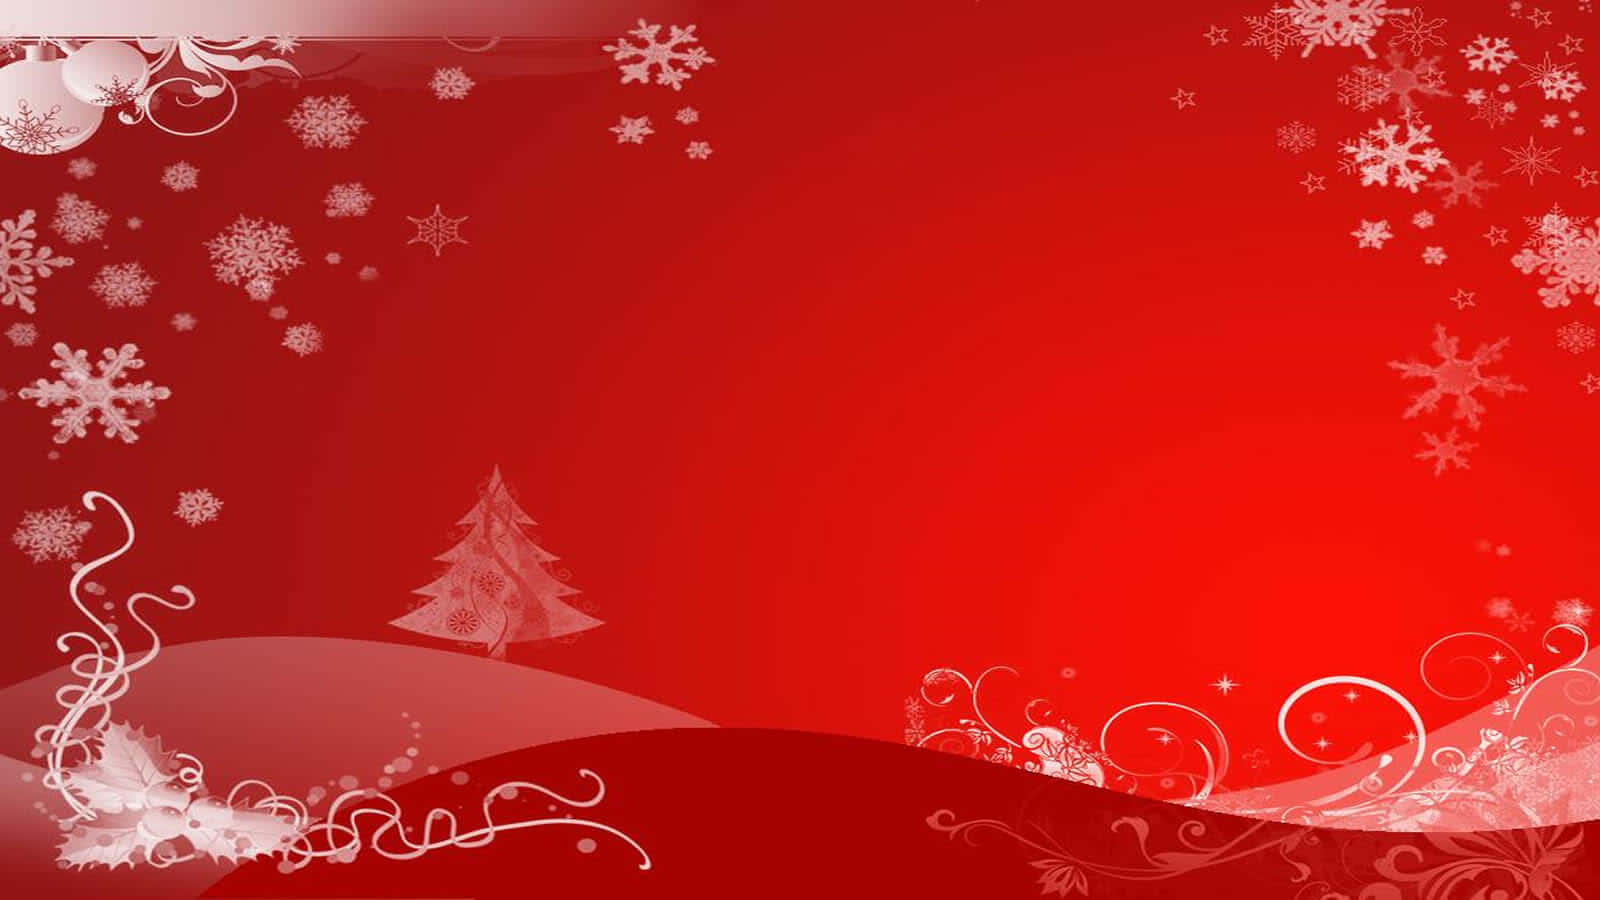 Get into the Christmas Spirit with this Stunning Red Aesthetic! Wallpaper